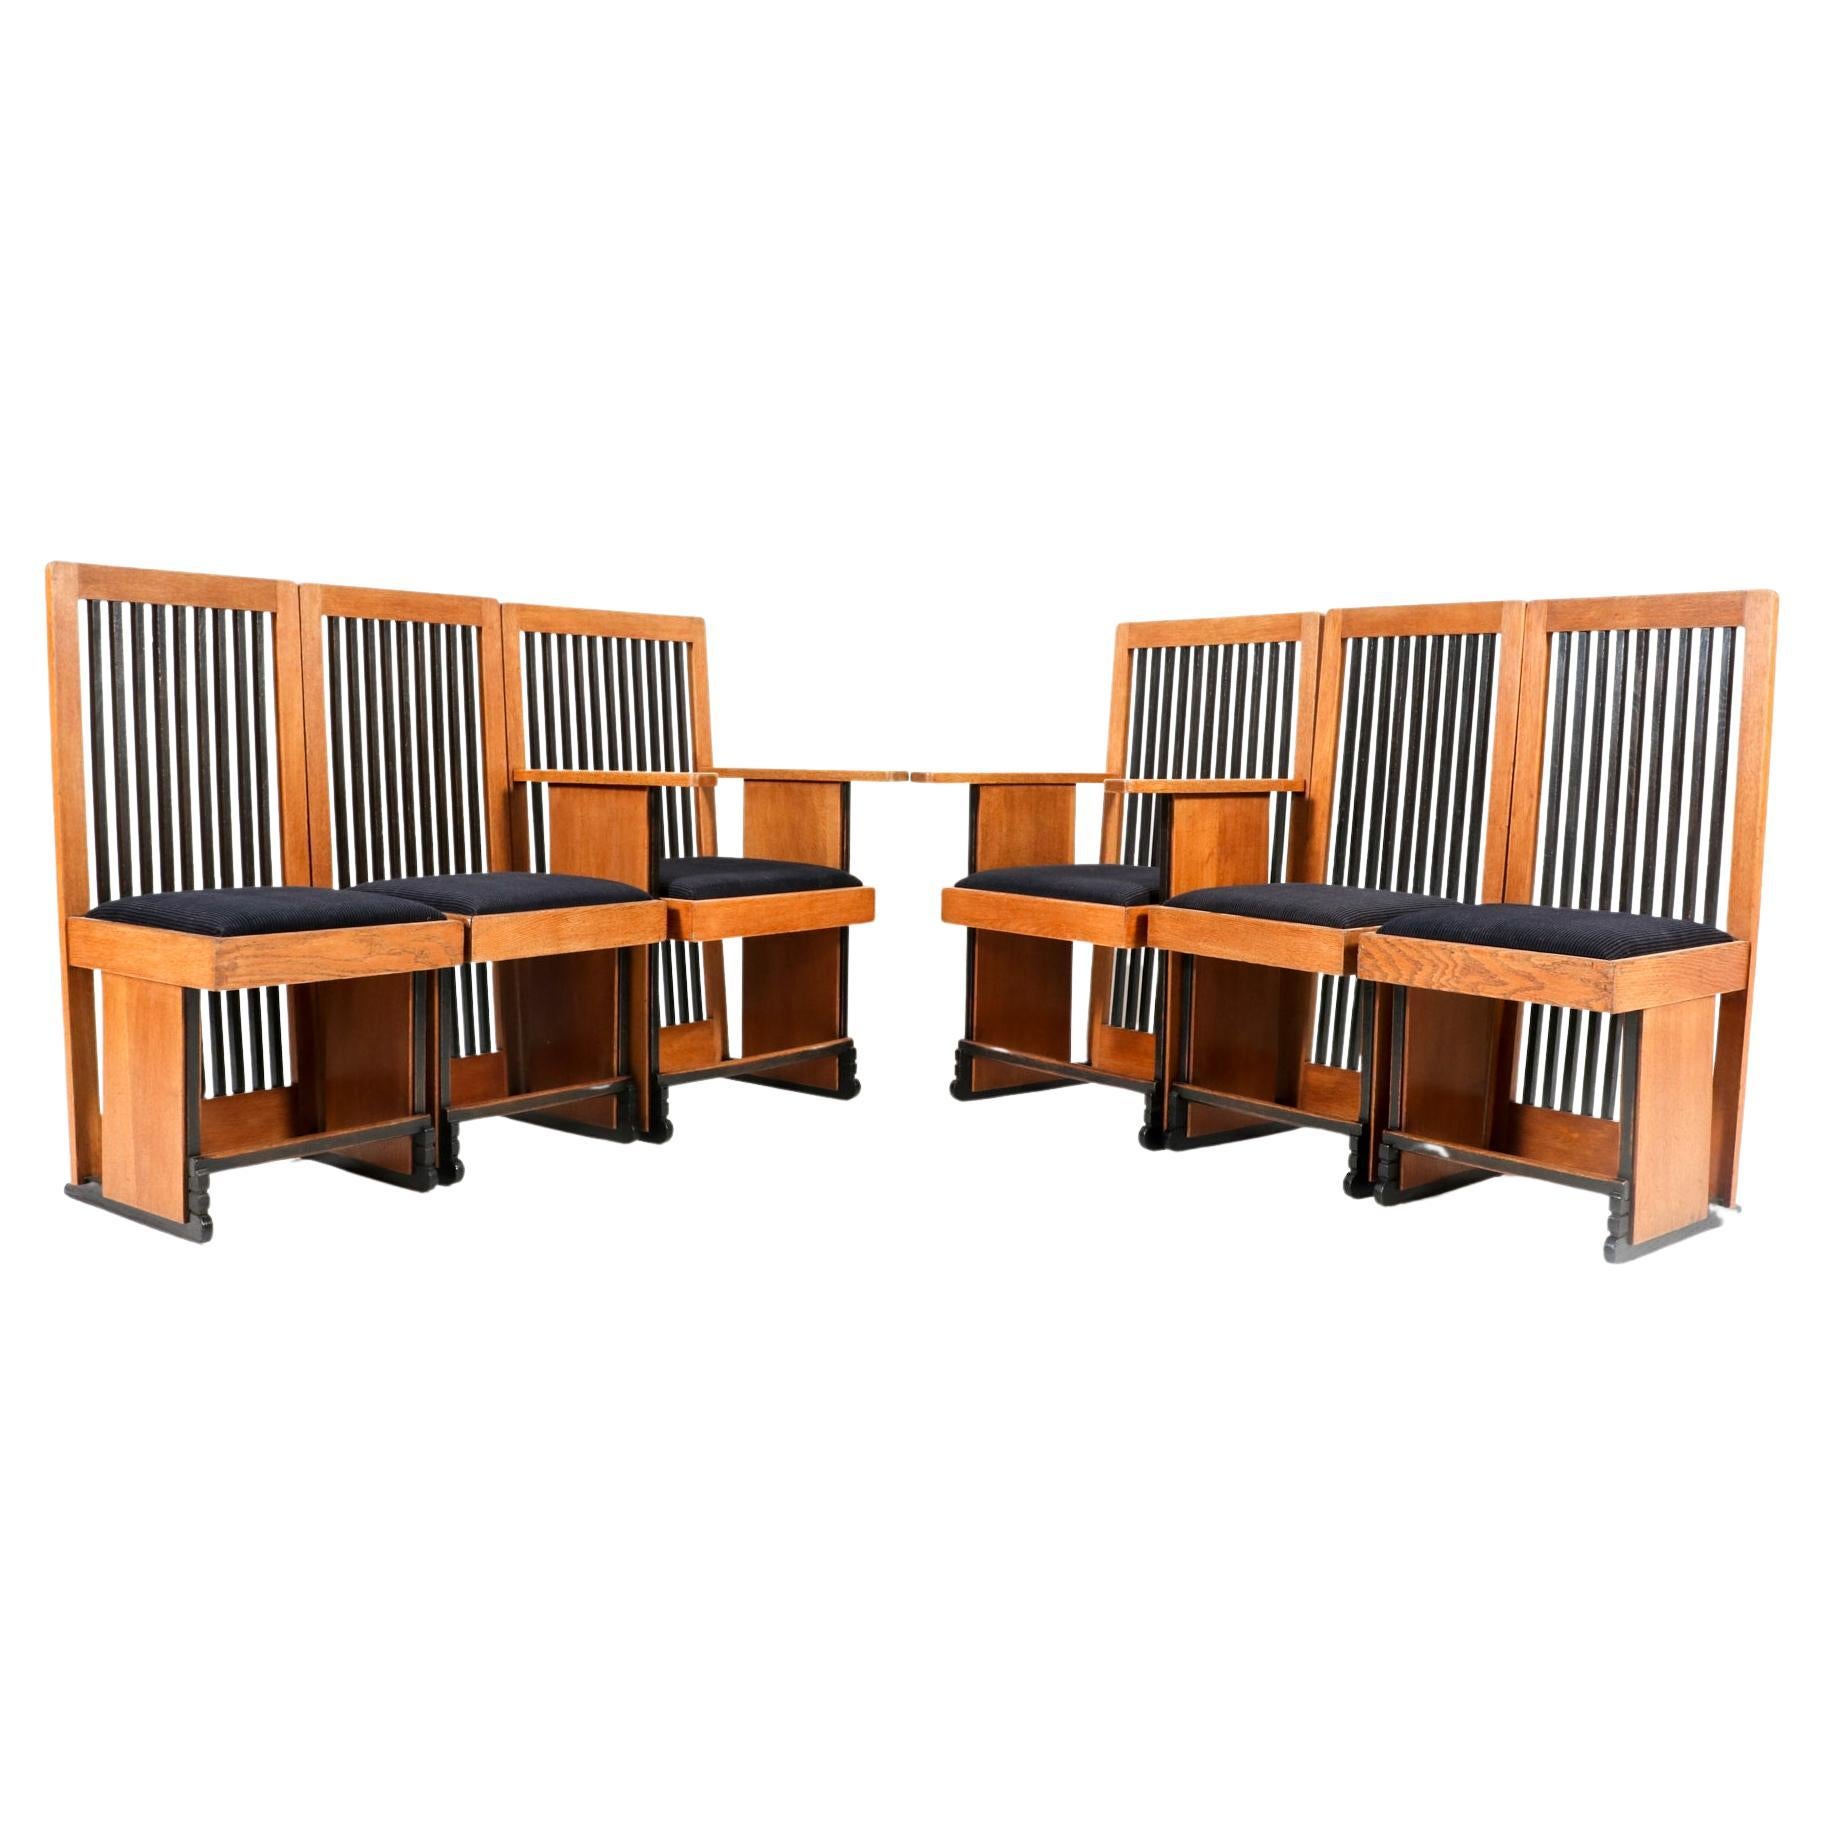  Oak Art Deco Modernist High Back Dining Room Chairs by Architect Caspers, 1920s For Sale